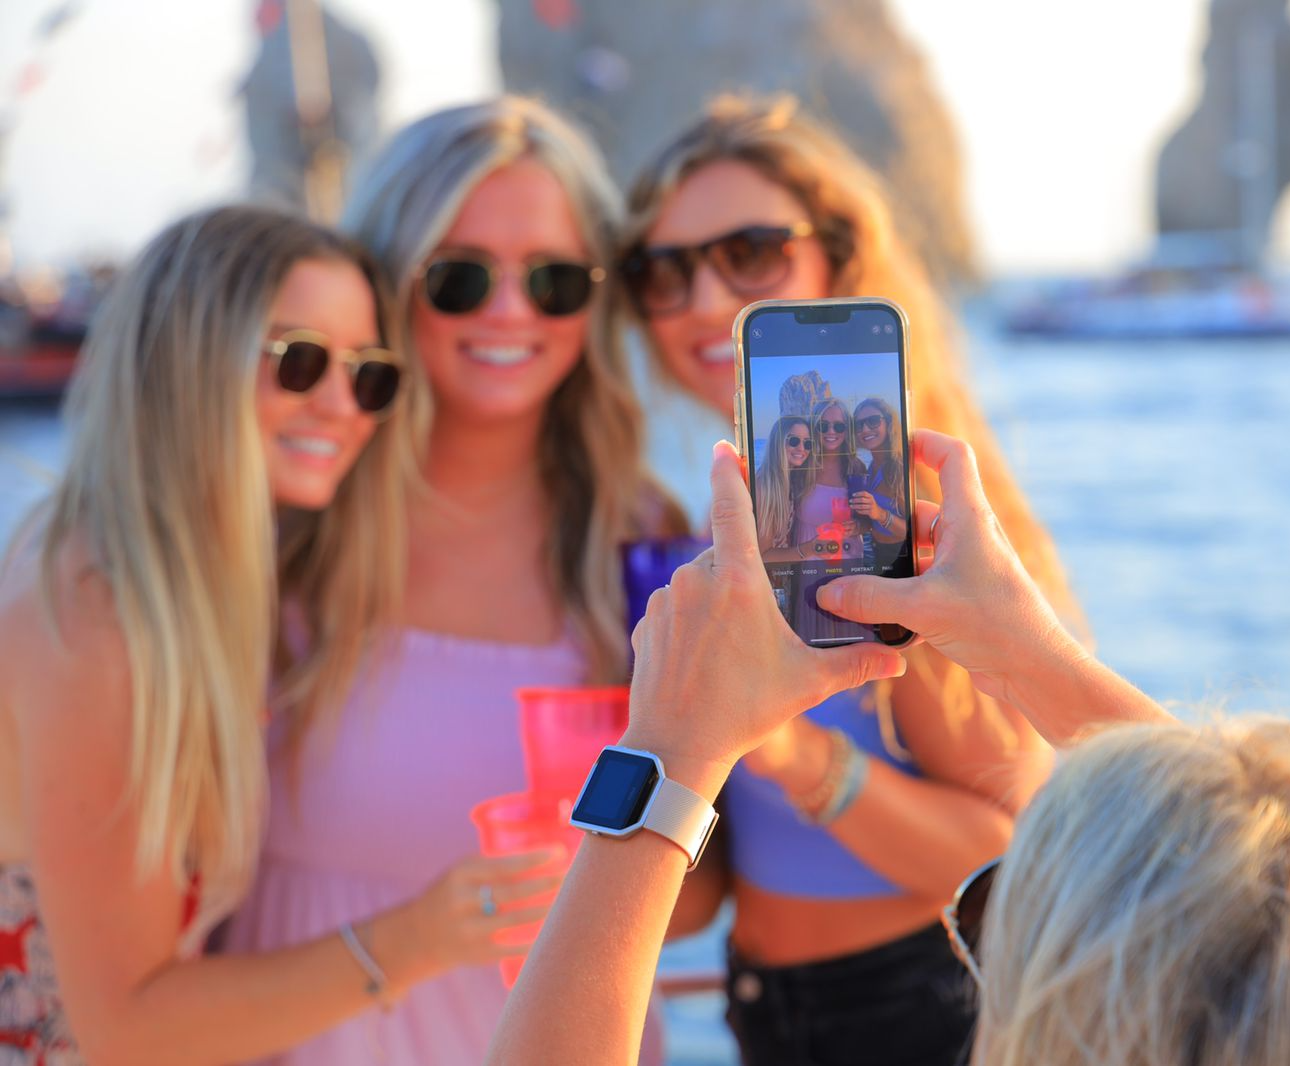 A woman is taking a picture of three women on a boat